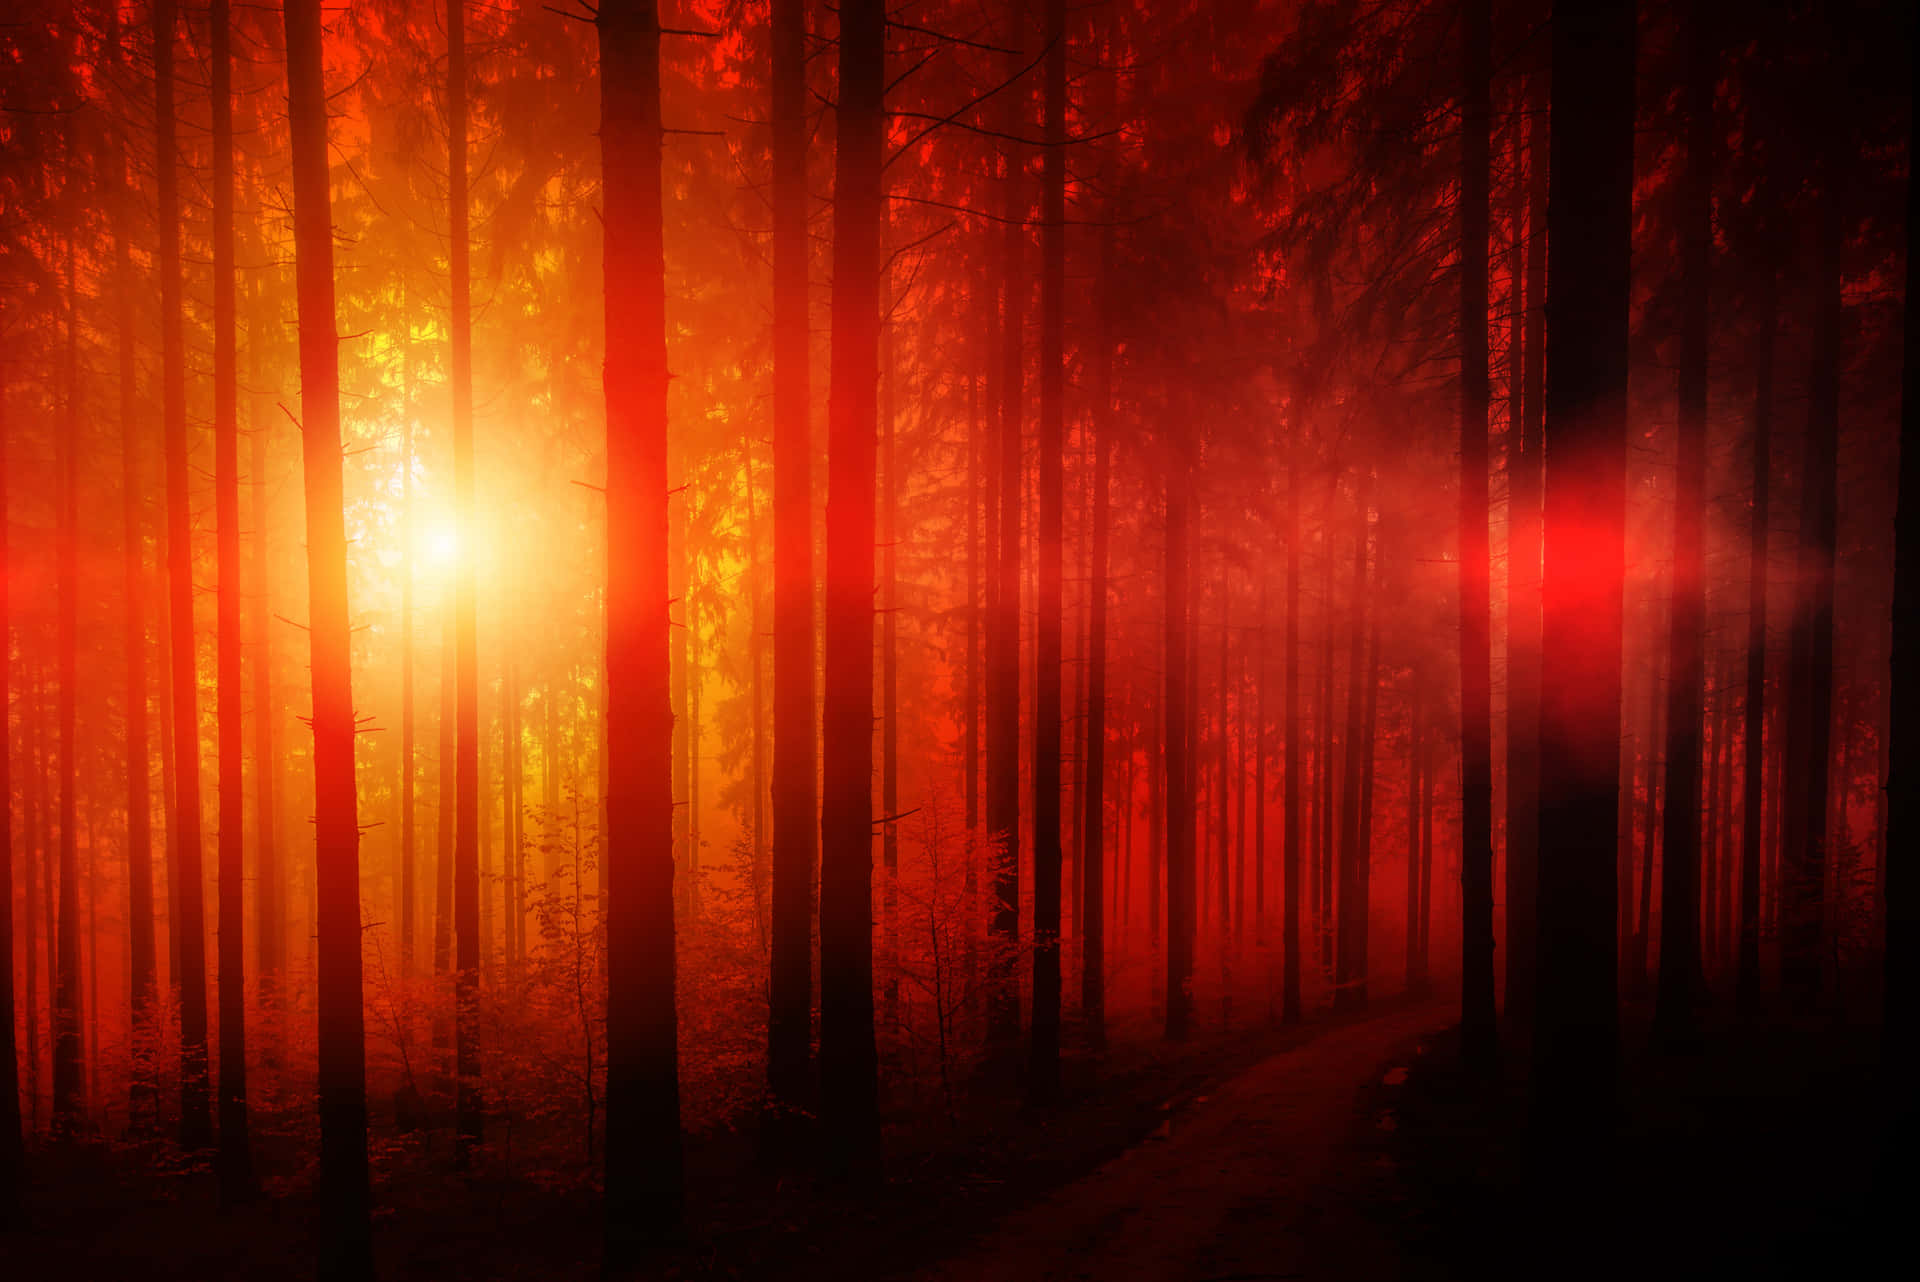 Take a journey through the Red Forest Wallpaper